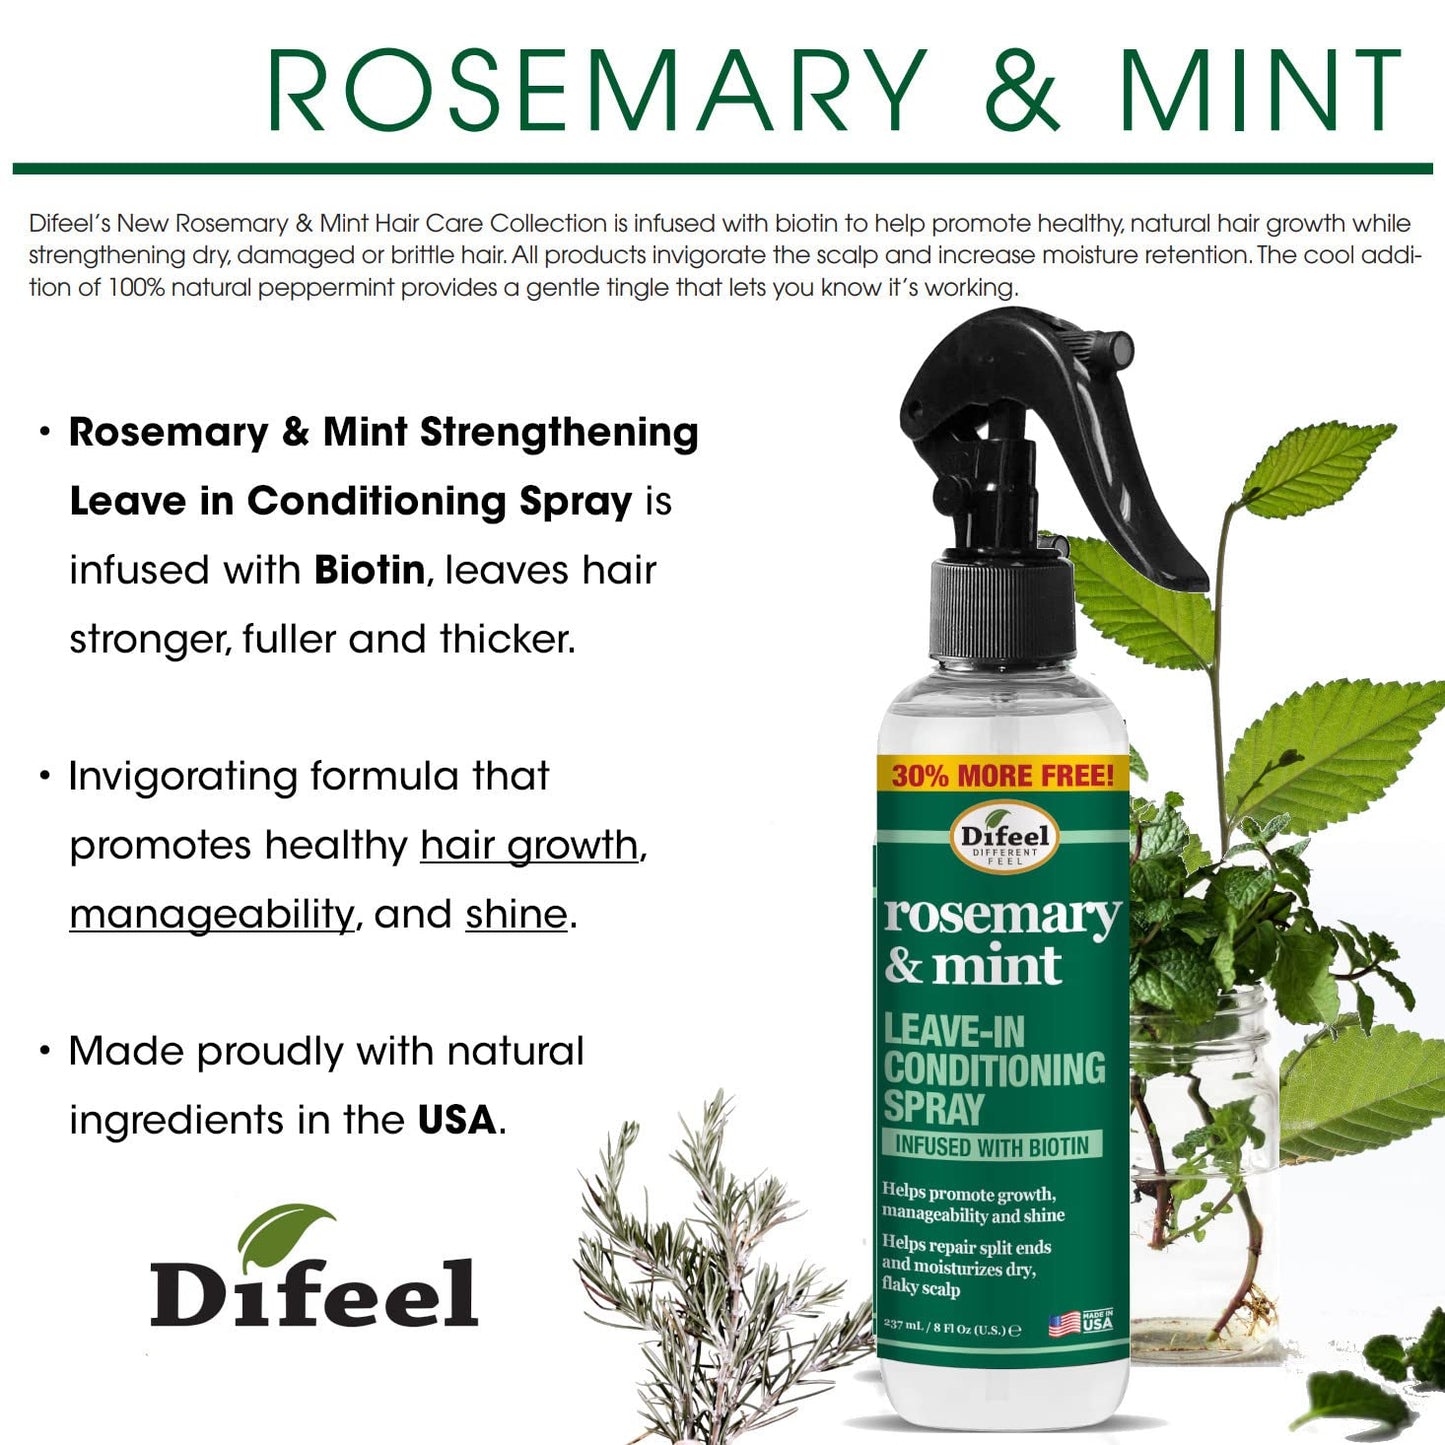 DIFEEL ROSEMARY & MINT LEAVE IN CONDTIONING SPRAY 8OZ